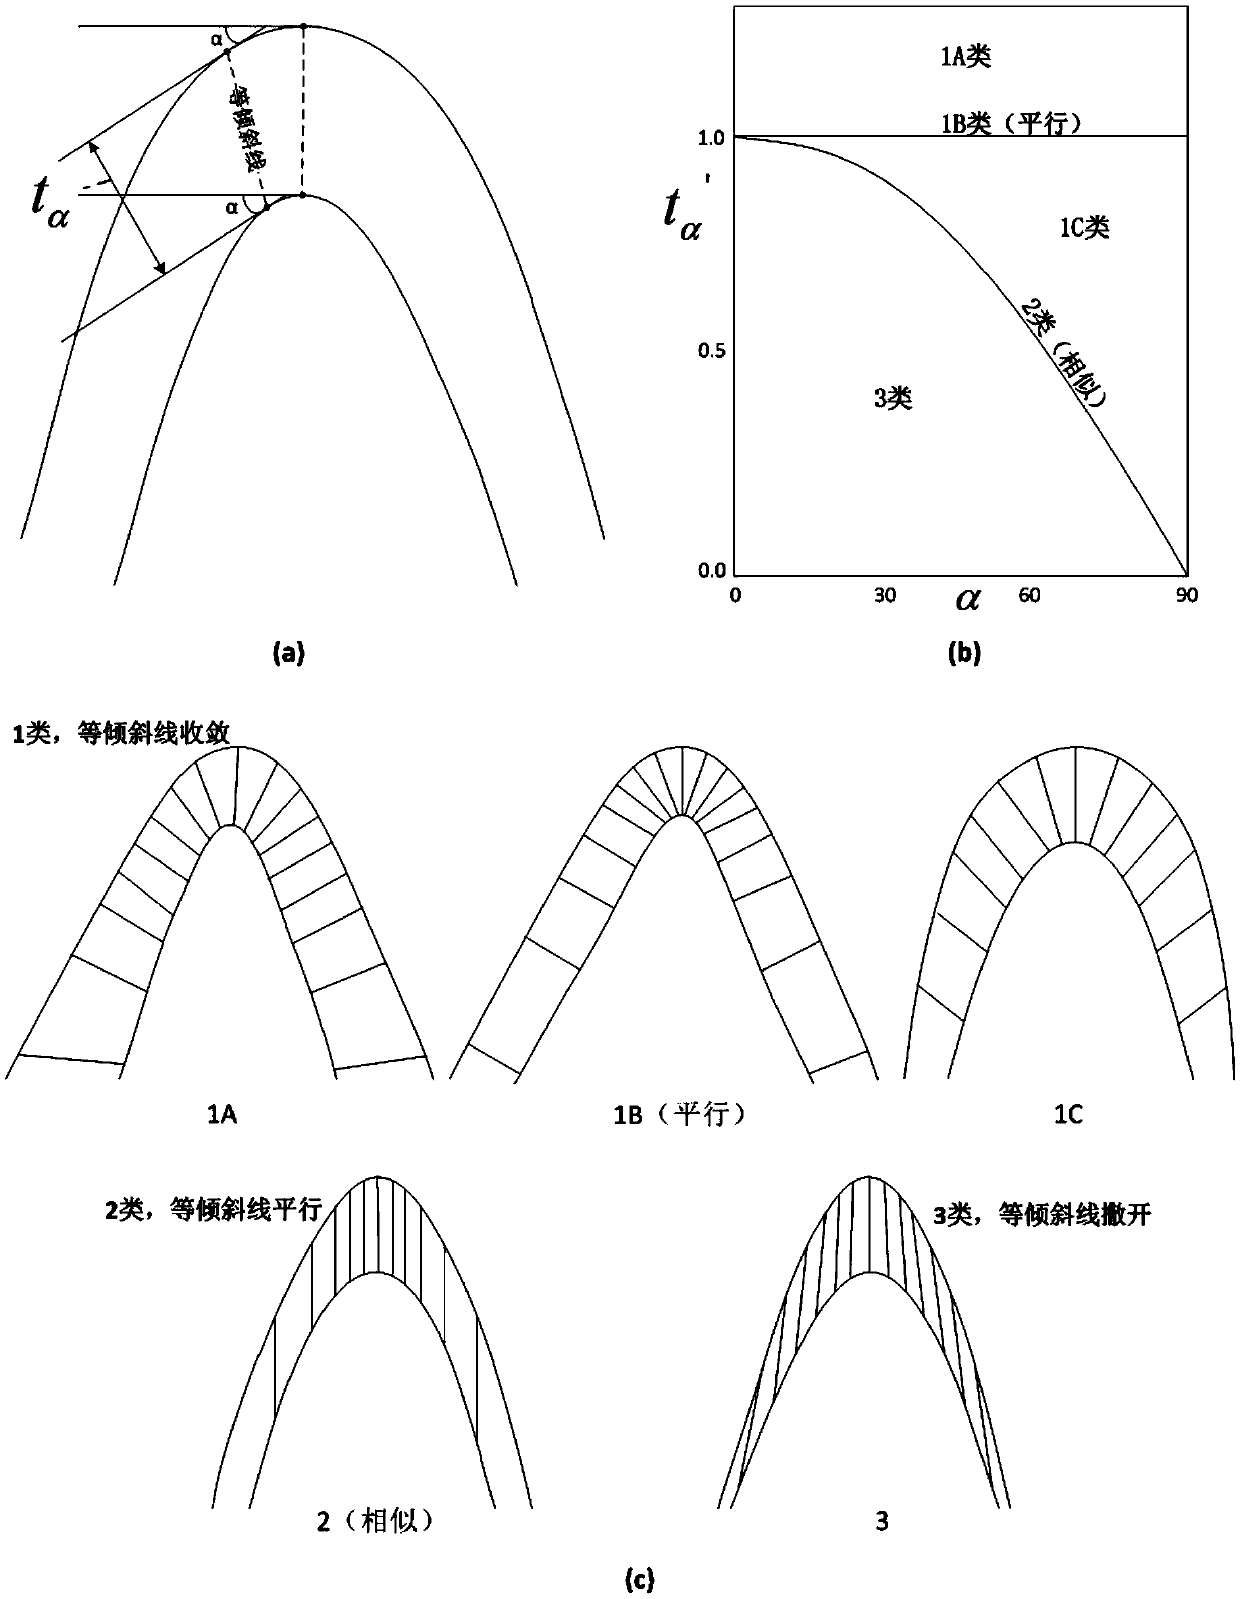 Three-dimensional geological structure model angular point grid dissection method considering folds